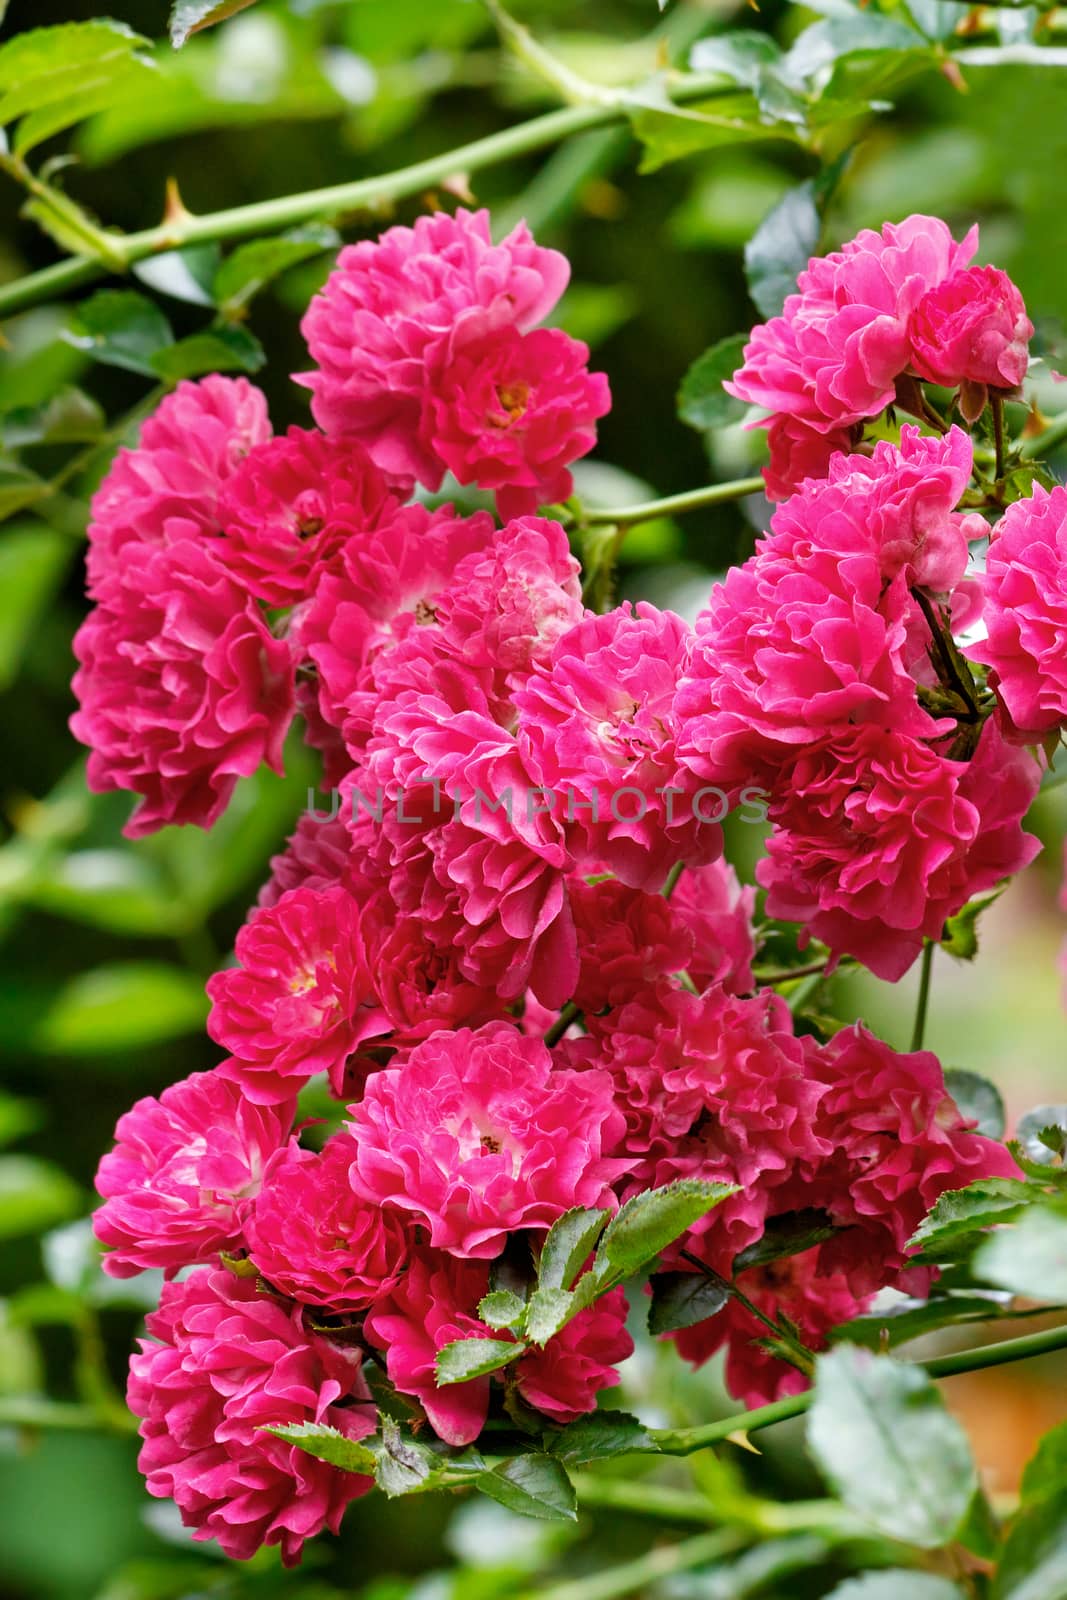 Bouquet of delicate pink-red flowers of a climbing rose with velvet petals in the rays of soft sunlight bloom in the garden against a background of green leaves, vertical image, close-up.